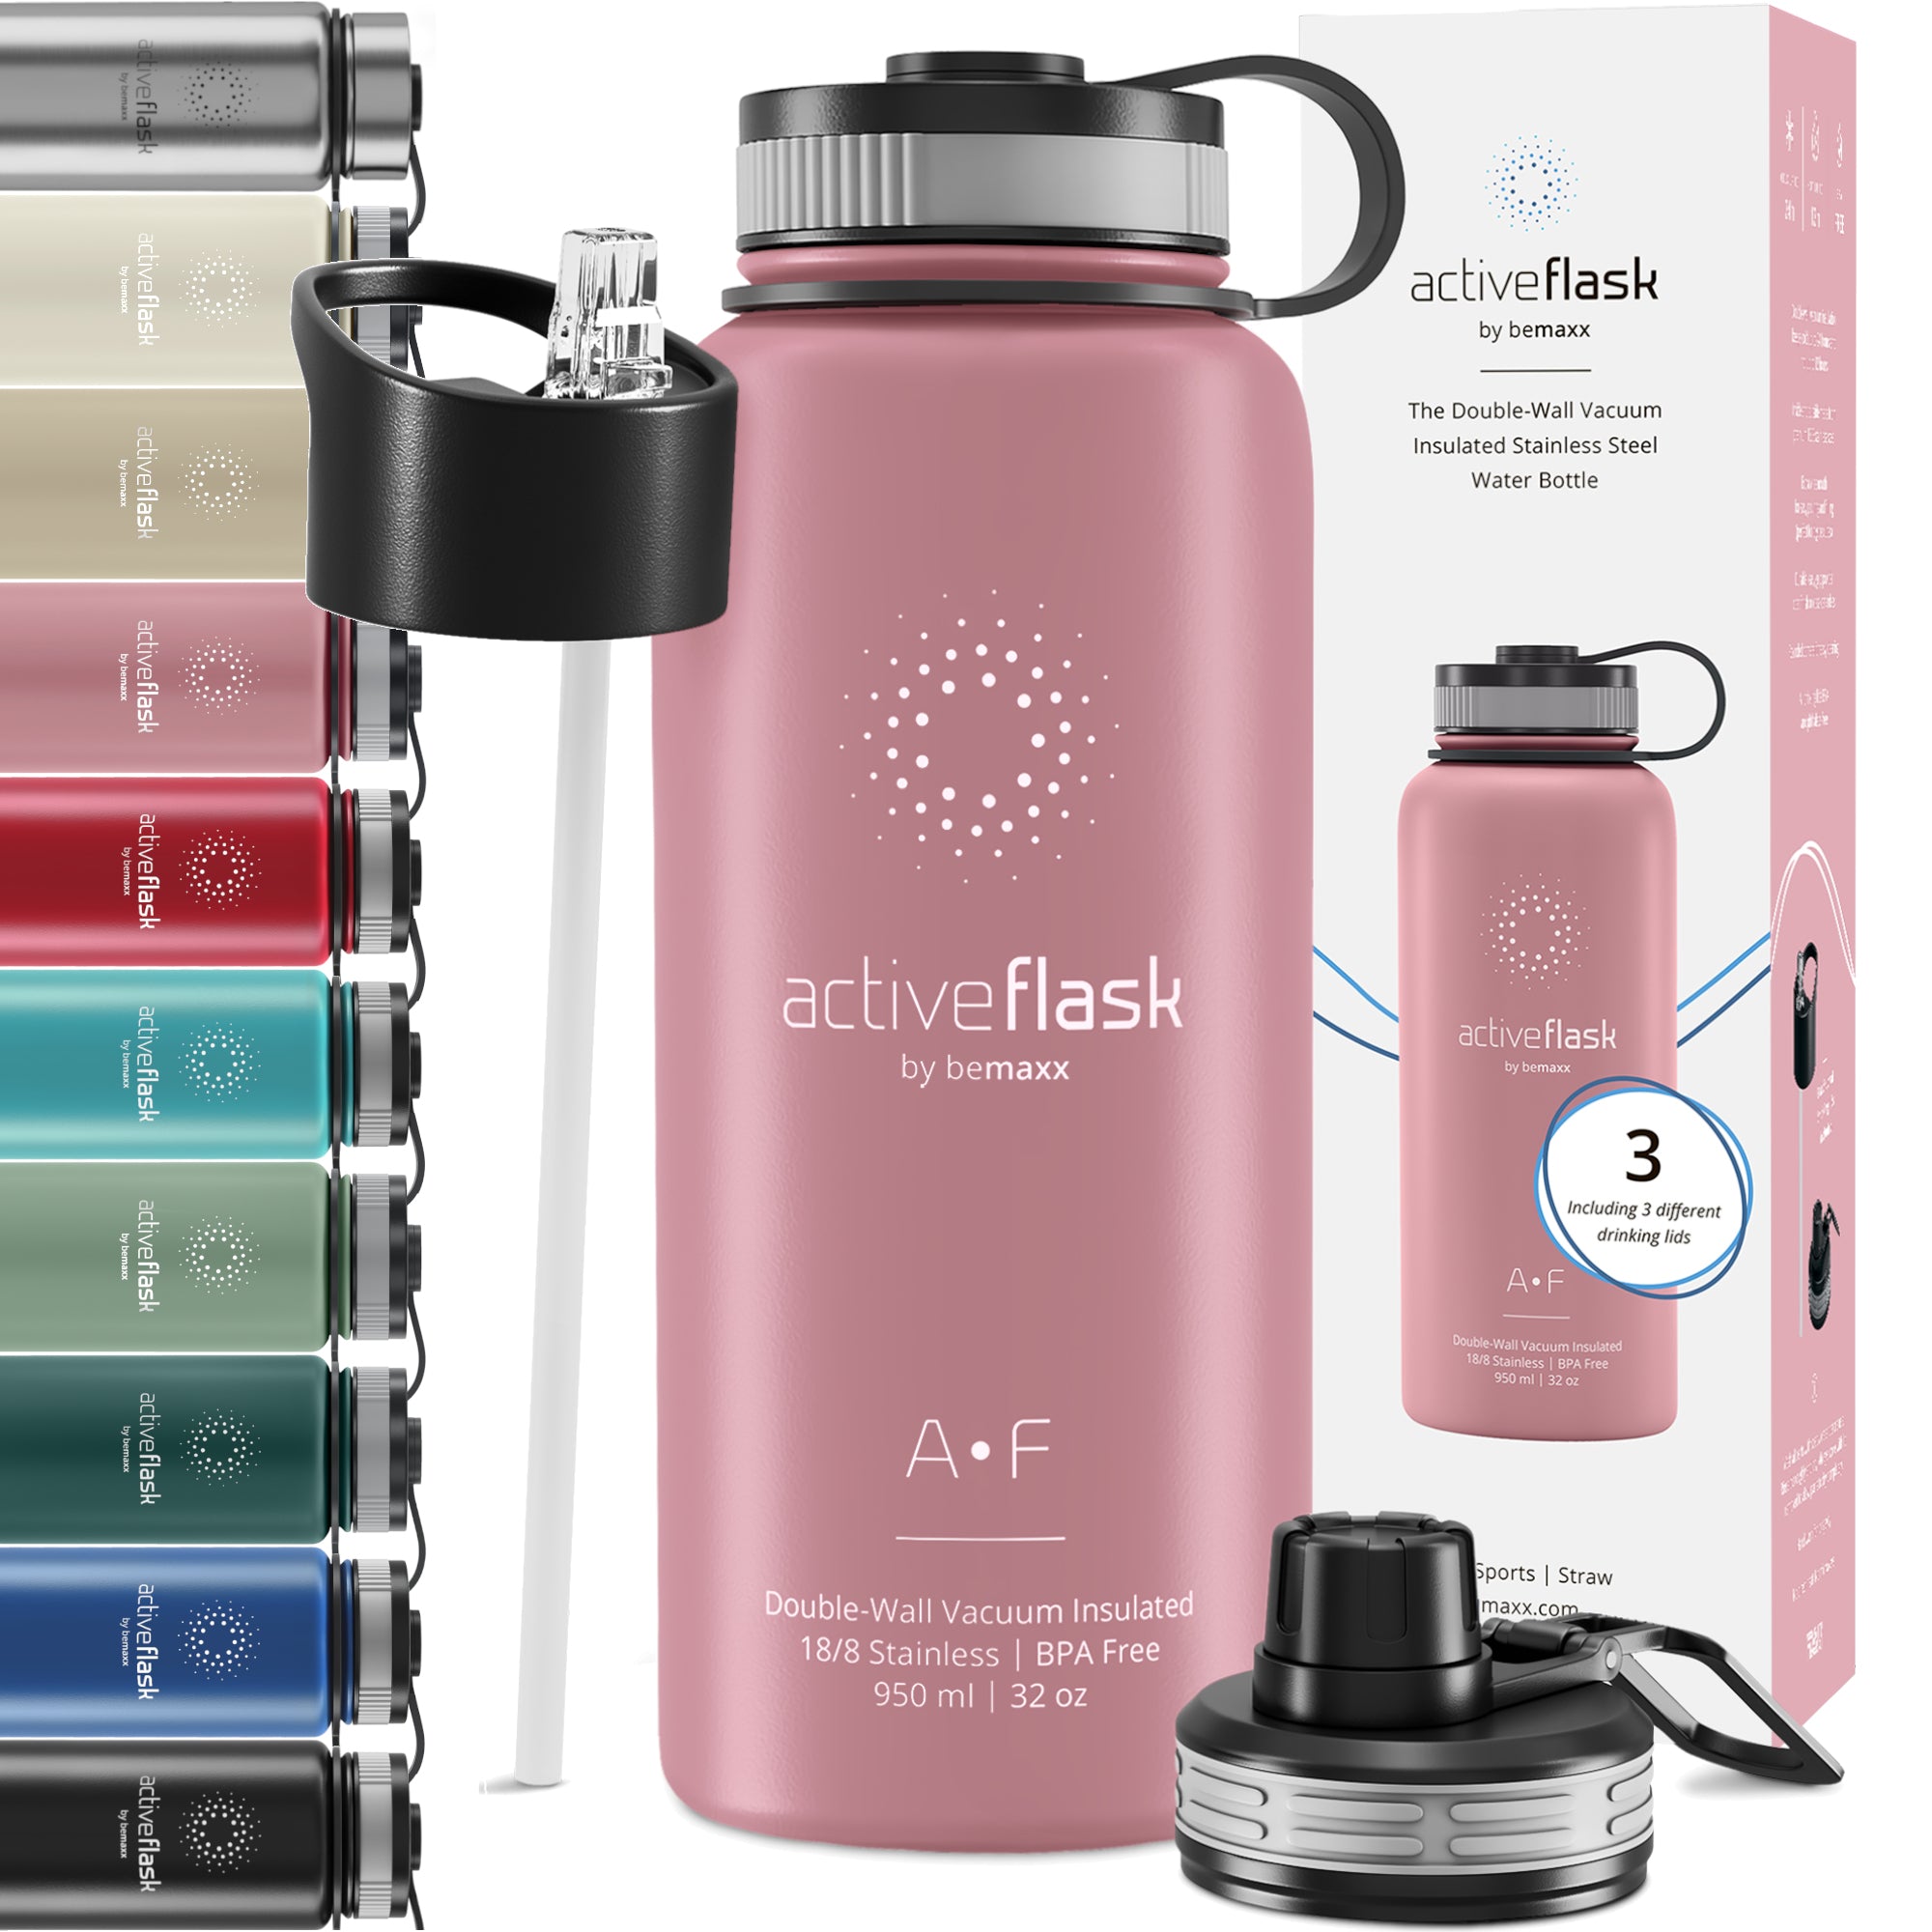 ACTIVE FLASK